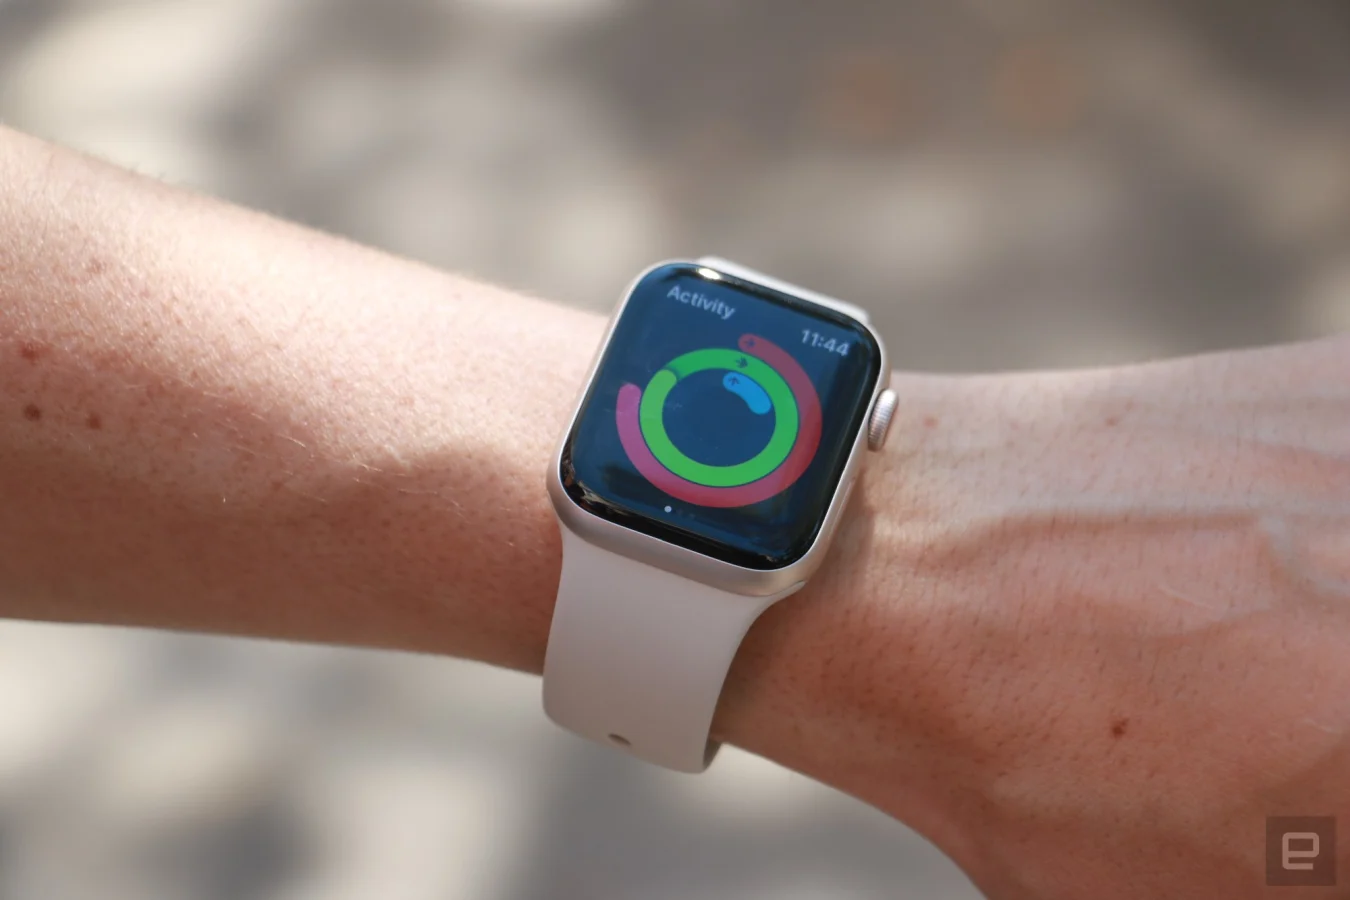 Apple Watch SE (2022) on a person's wrist, showing the Activity app and rings.